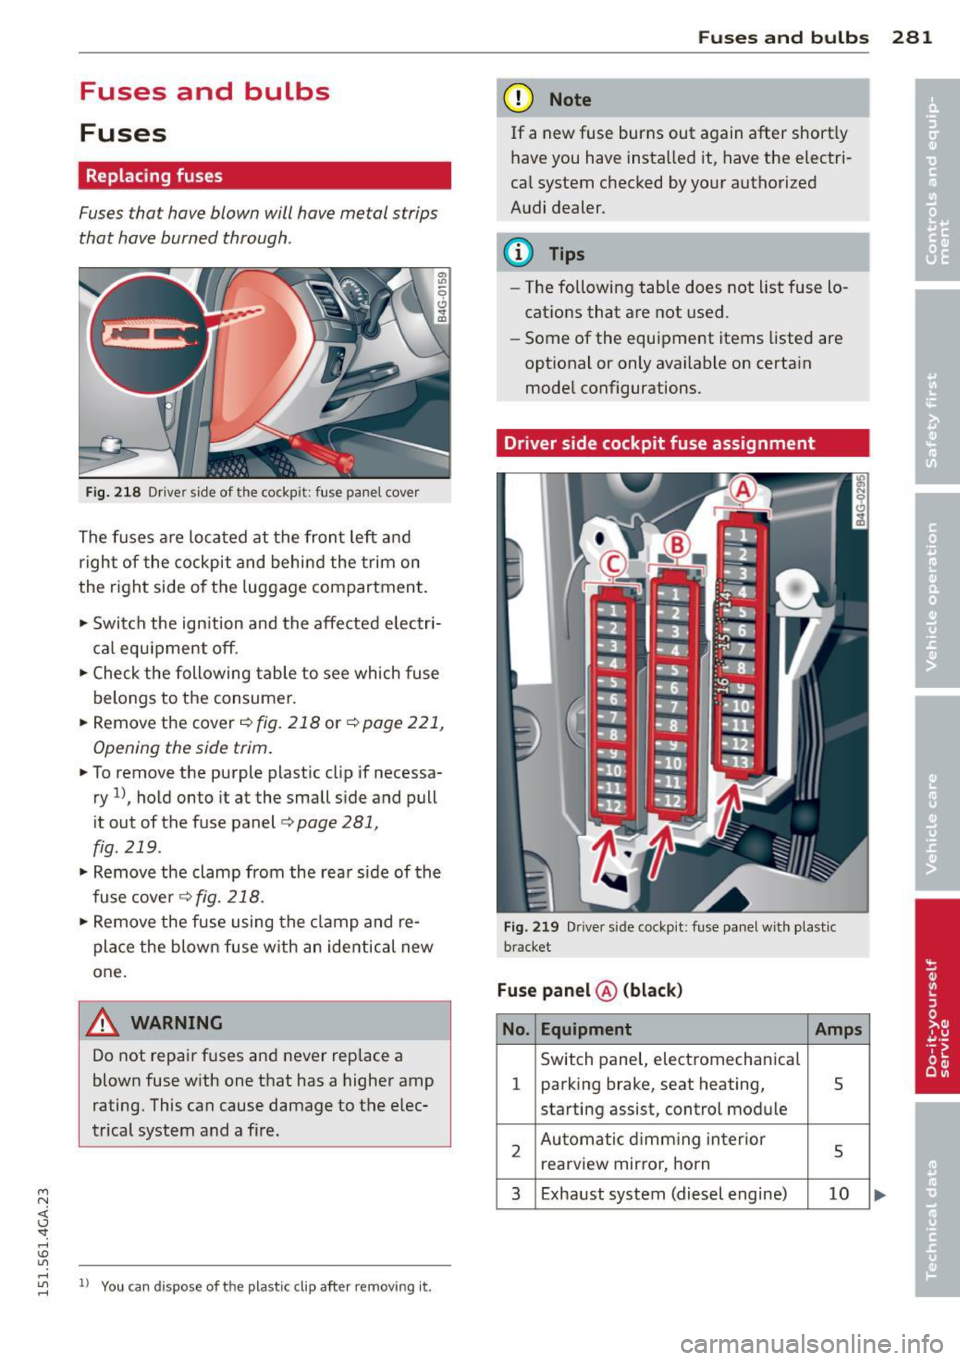 AUDI A7 2015  Owners Manual M N <( I.J "". rl I.O 
Fuses  and  bulbs 
Fuses 
Replacing  fuses 
Fuses that  have  blown  will have  metal  strips 
that  have  burned  through. 
Fig . 2 18 Dr iver  side  of the  cockp it:  fuse  p